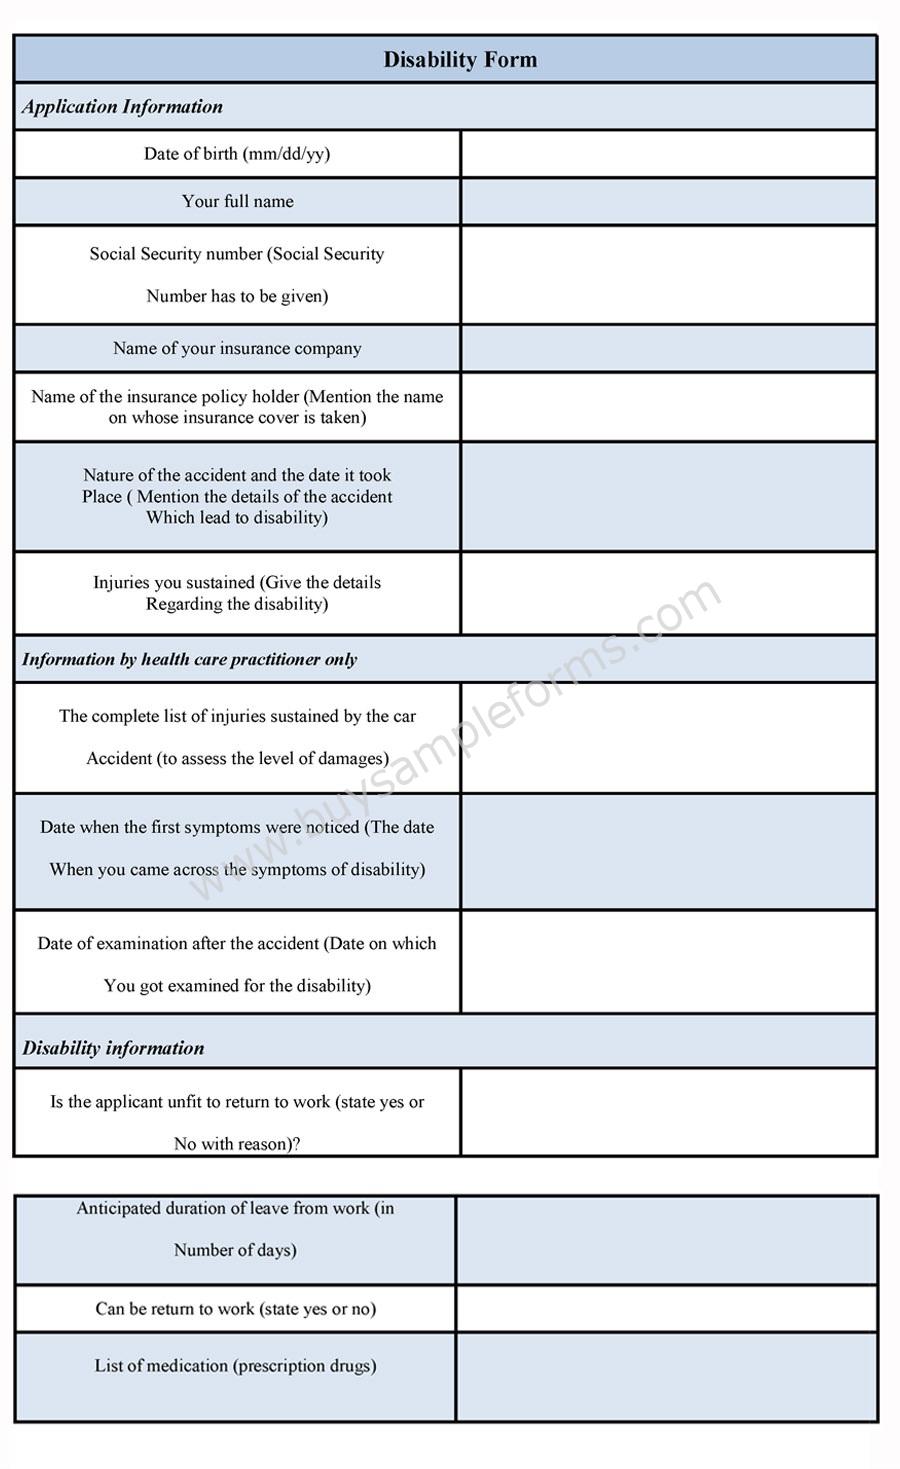 Sample Disability Form Format